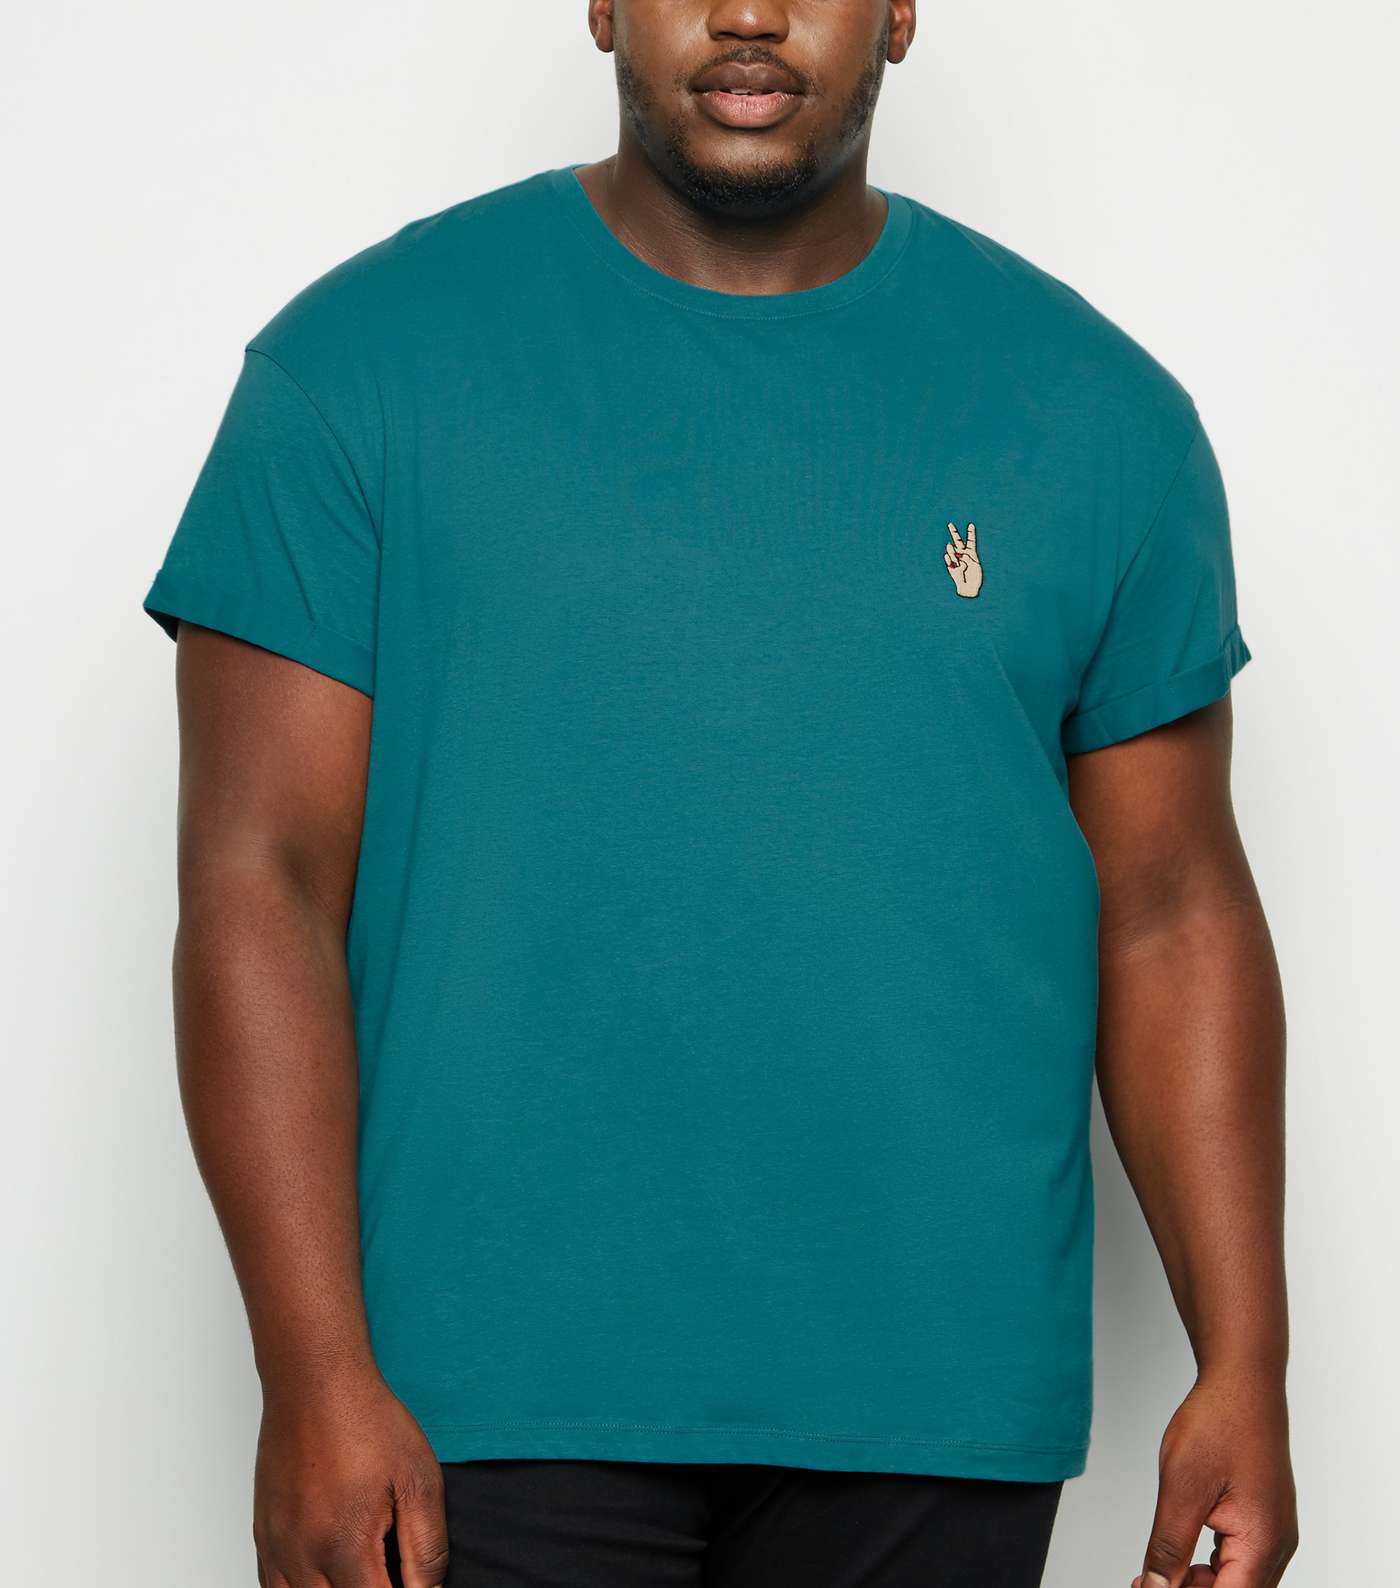 Plus Size Teal Peace Hand Embroidered T-Shirt